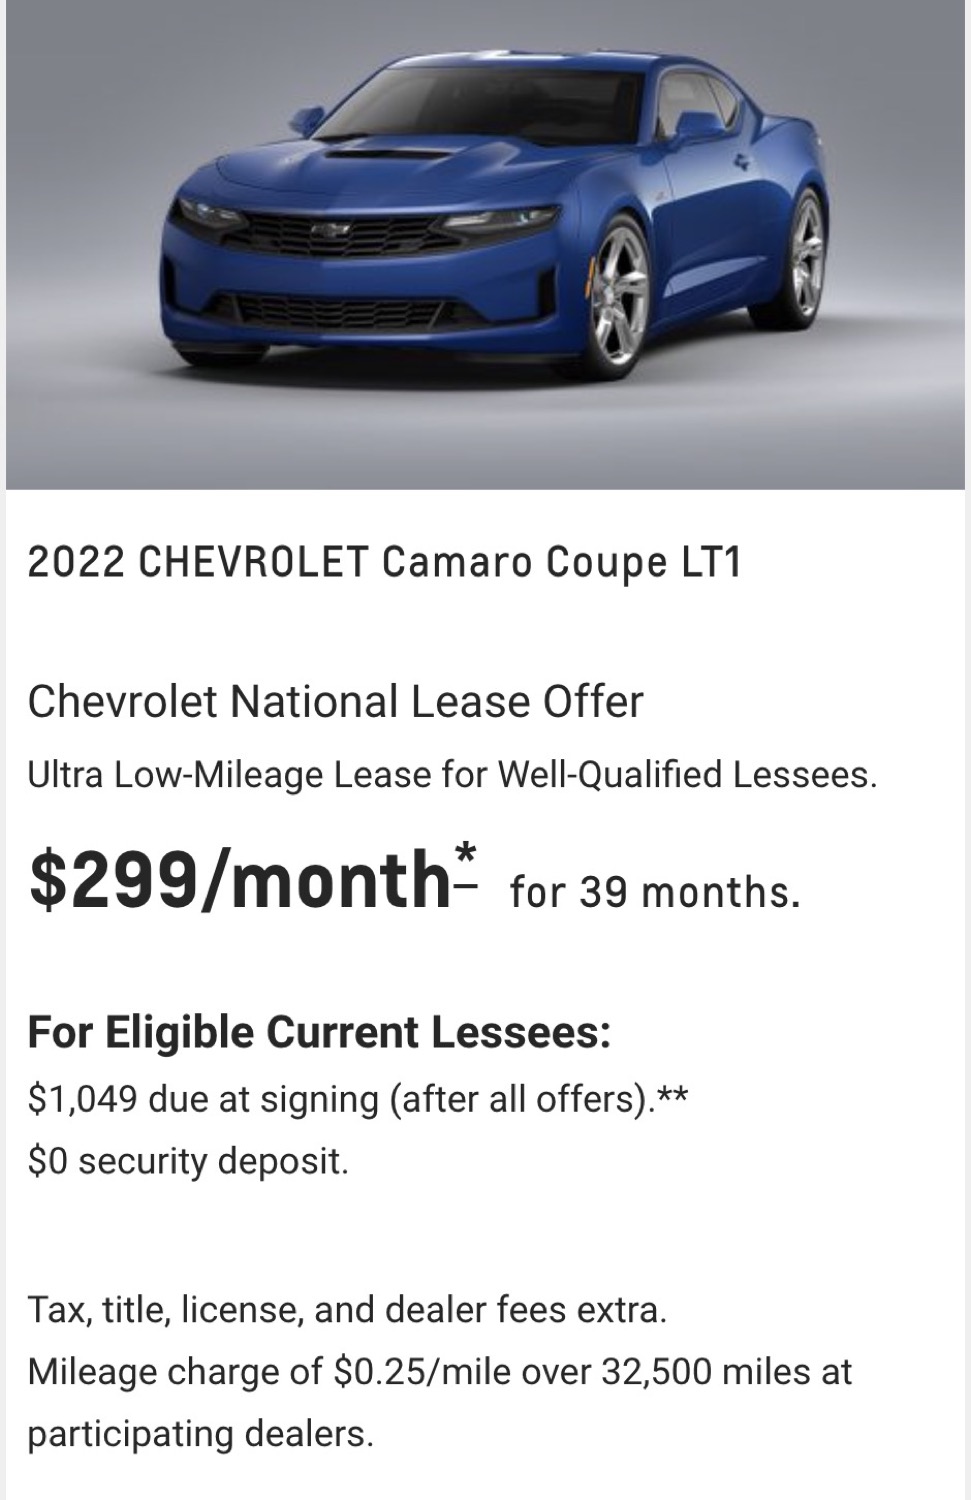 Chevy Camaro Lease Continues For LT1 Coupe In December 2021